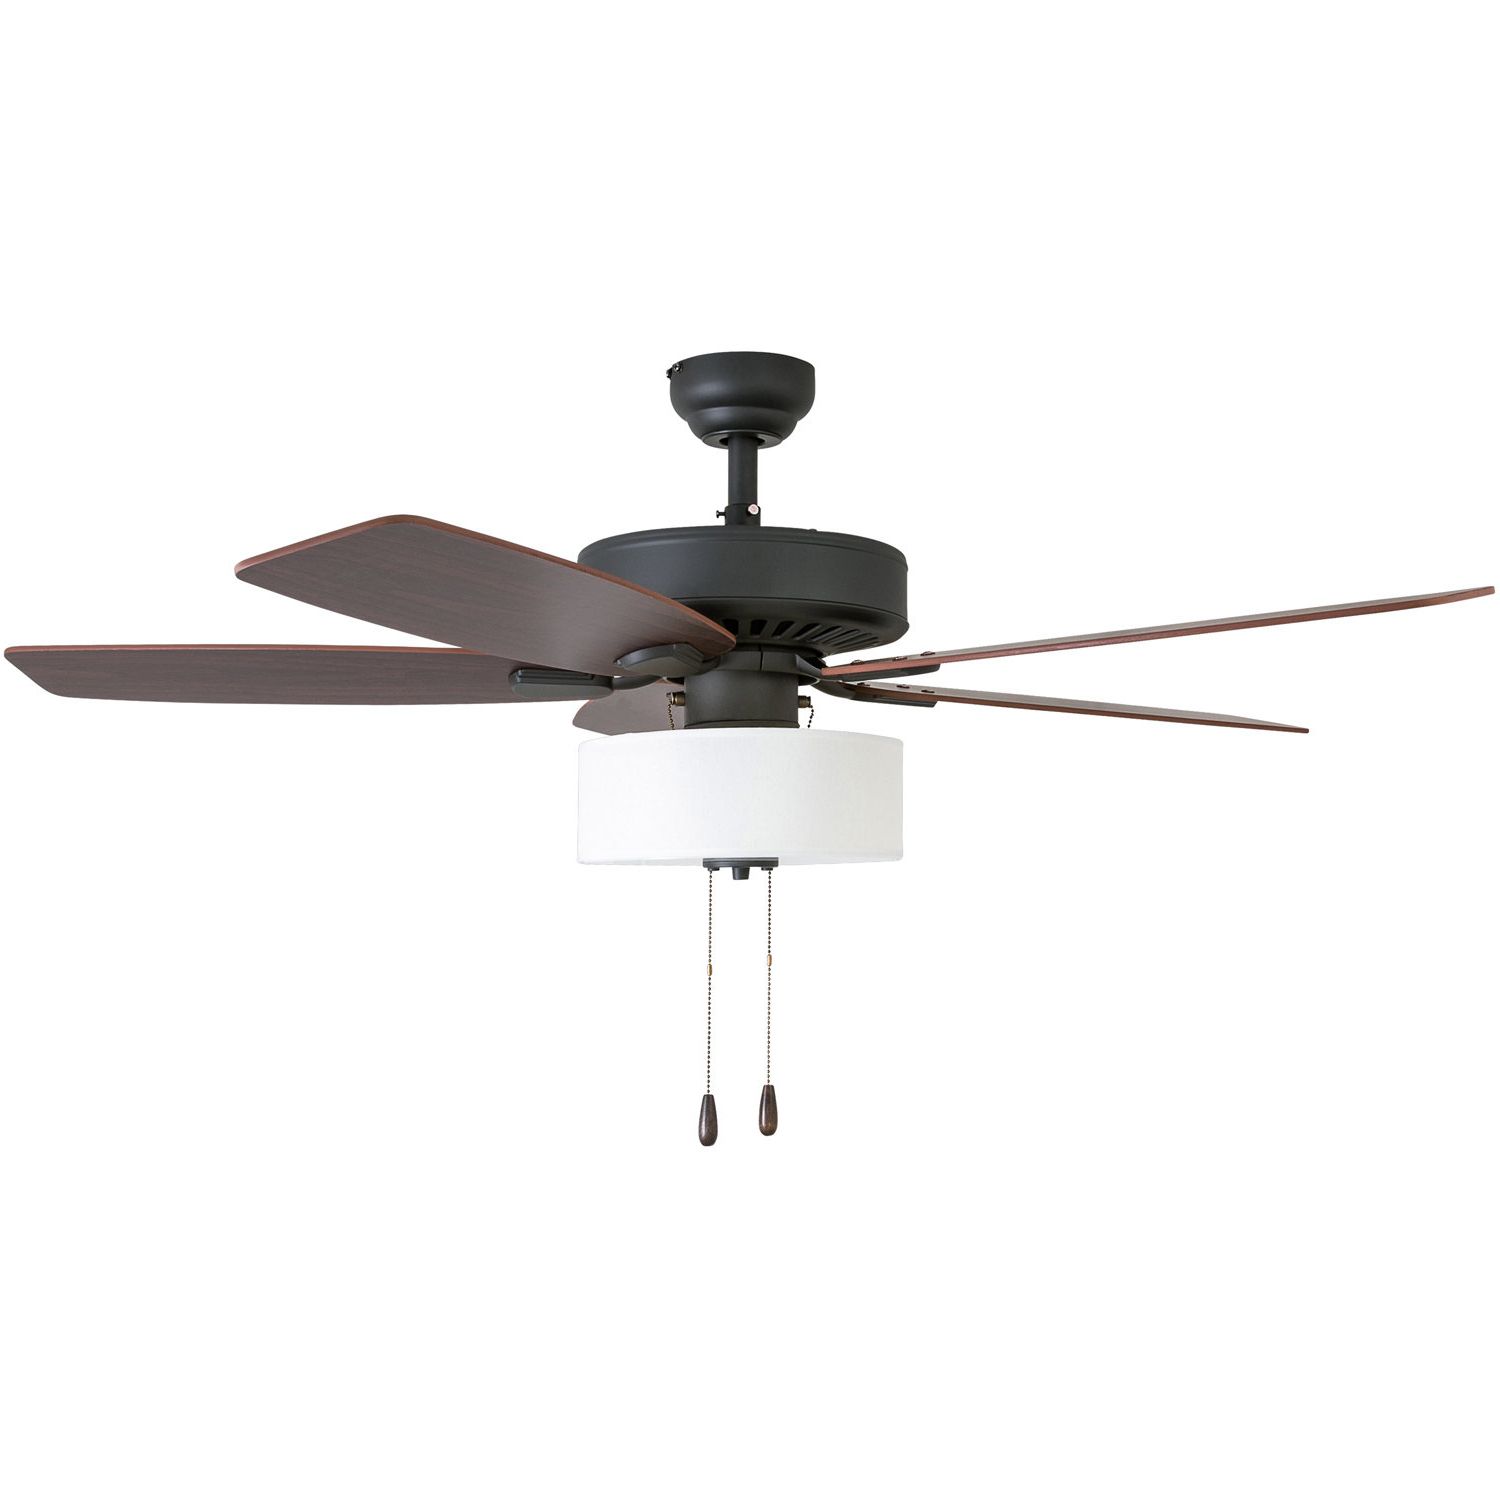 Sudie 5 Blade Led Ceiling Fans Pertaining To Latest 52" Sybilla 5 Blade Ceiling Fan, Light Kit Included (View 16 of 20)